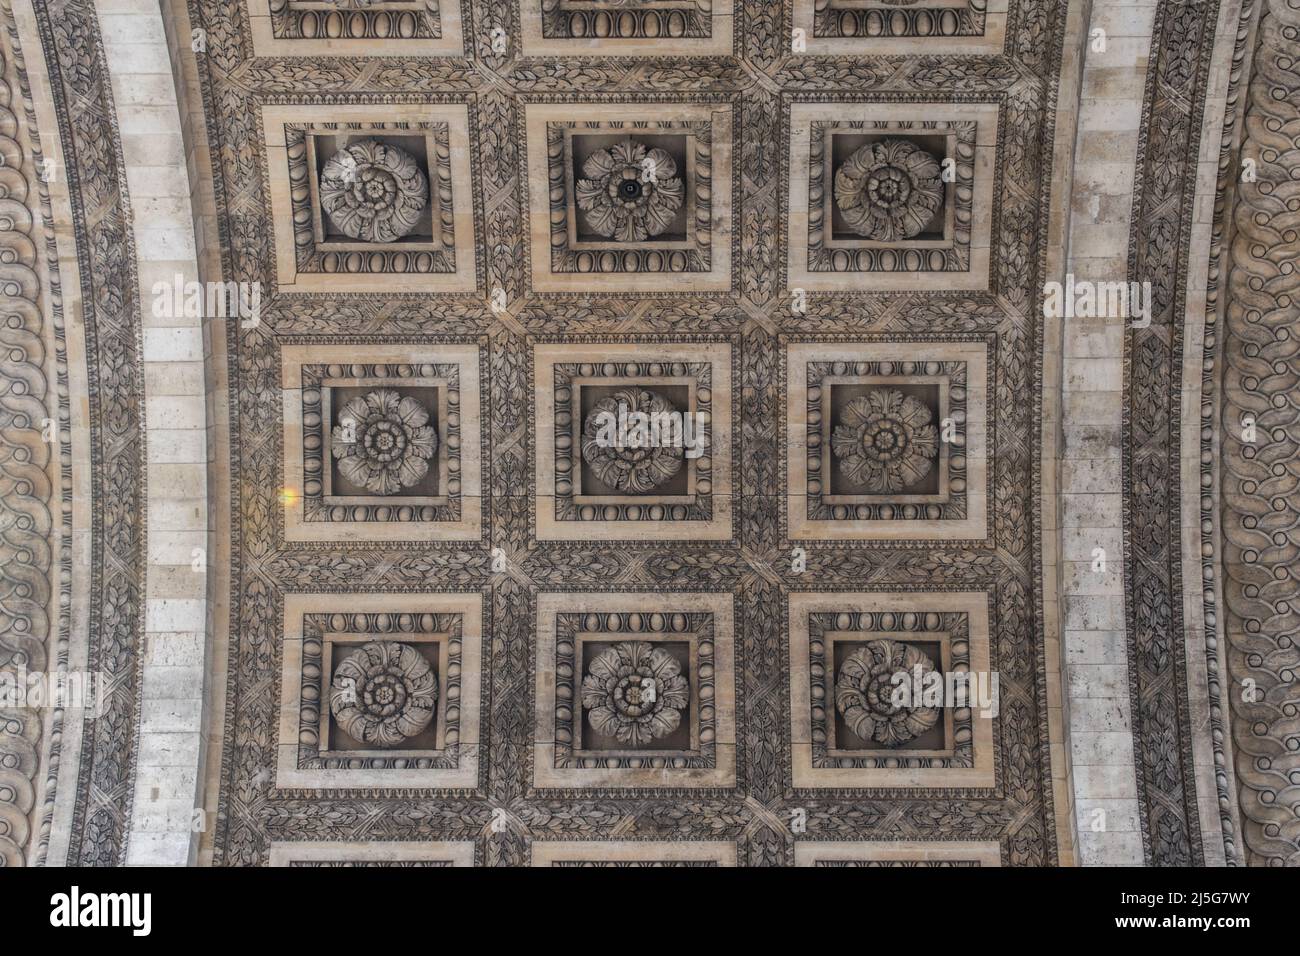 Paris: the ceiling with 21 sculpted roses of the Triumphal Arch of the Star (Arc de Triomphe de l'Etoile), one of the most famous monuments of Paris Stock Photo